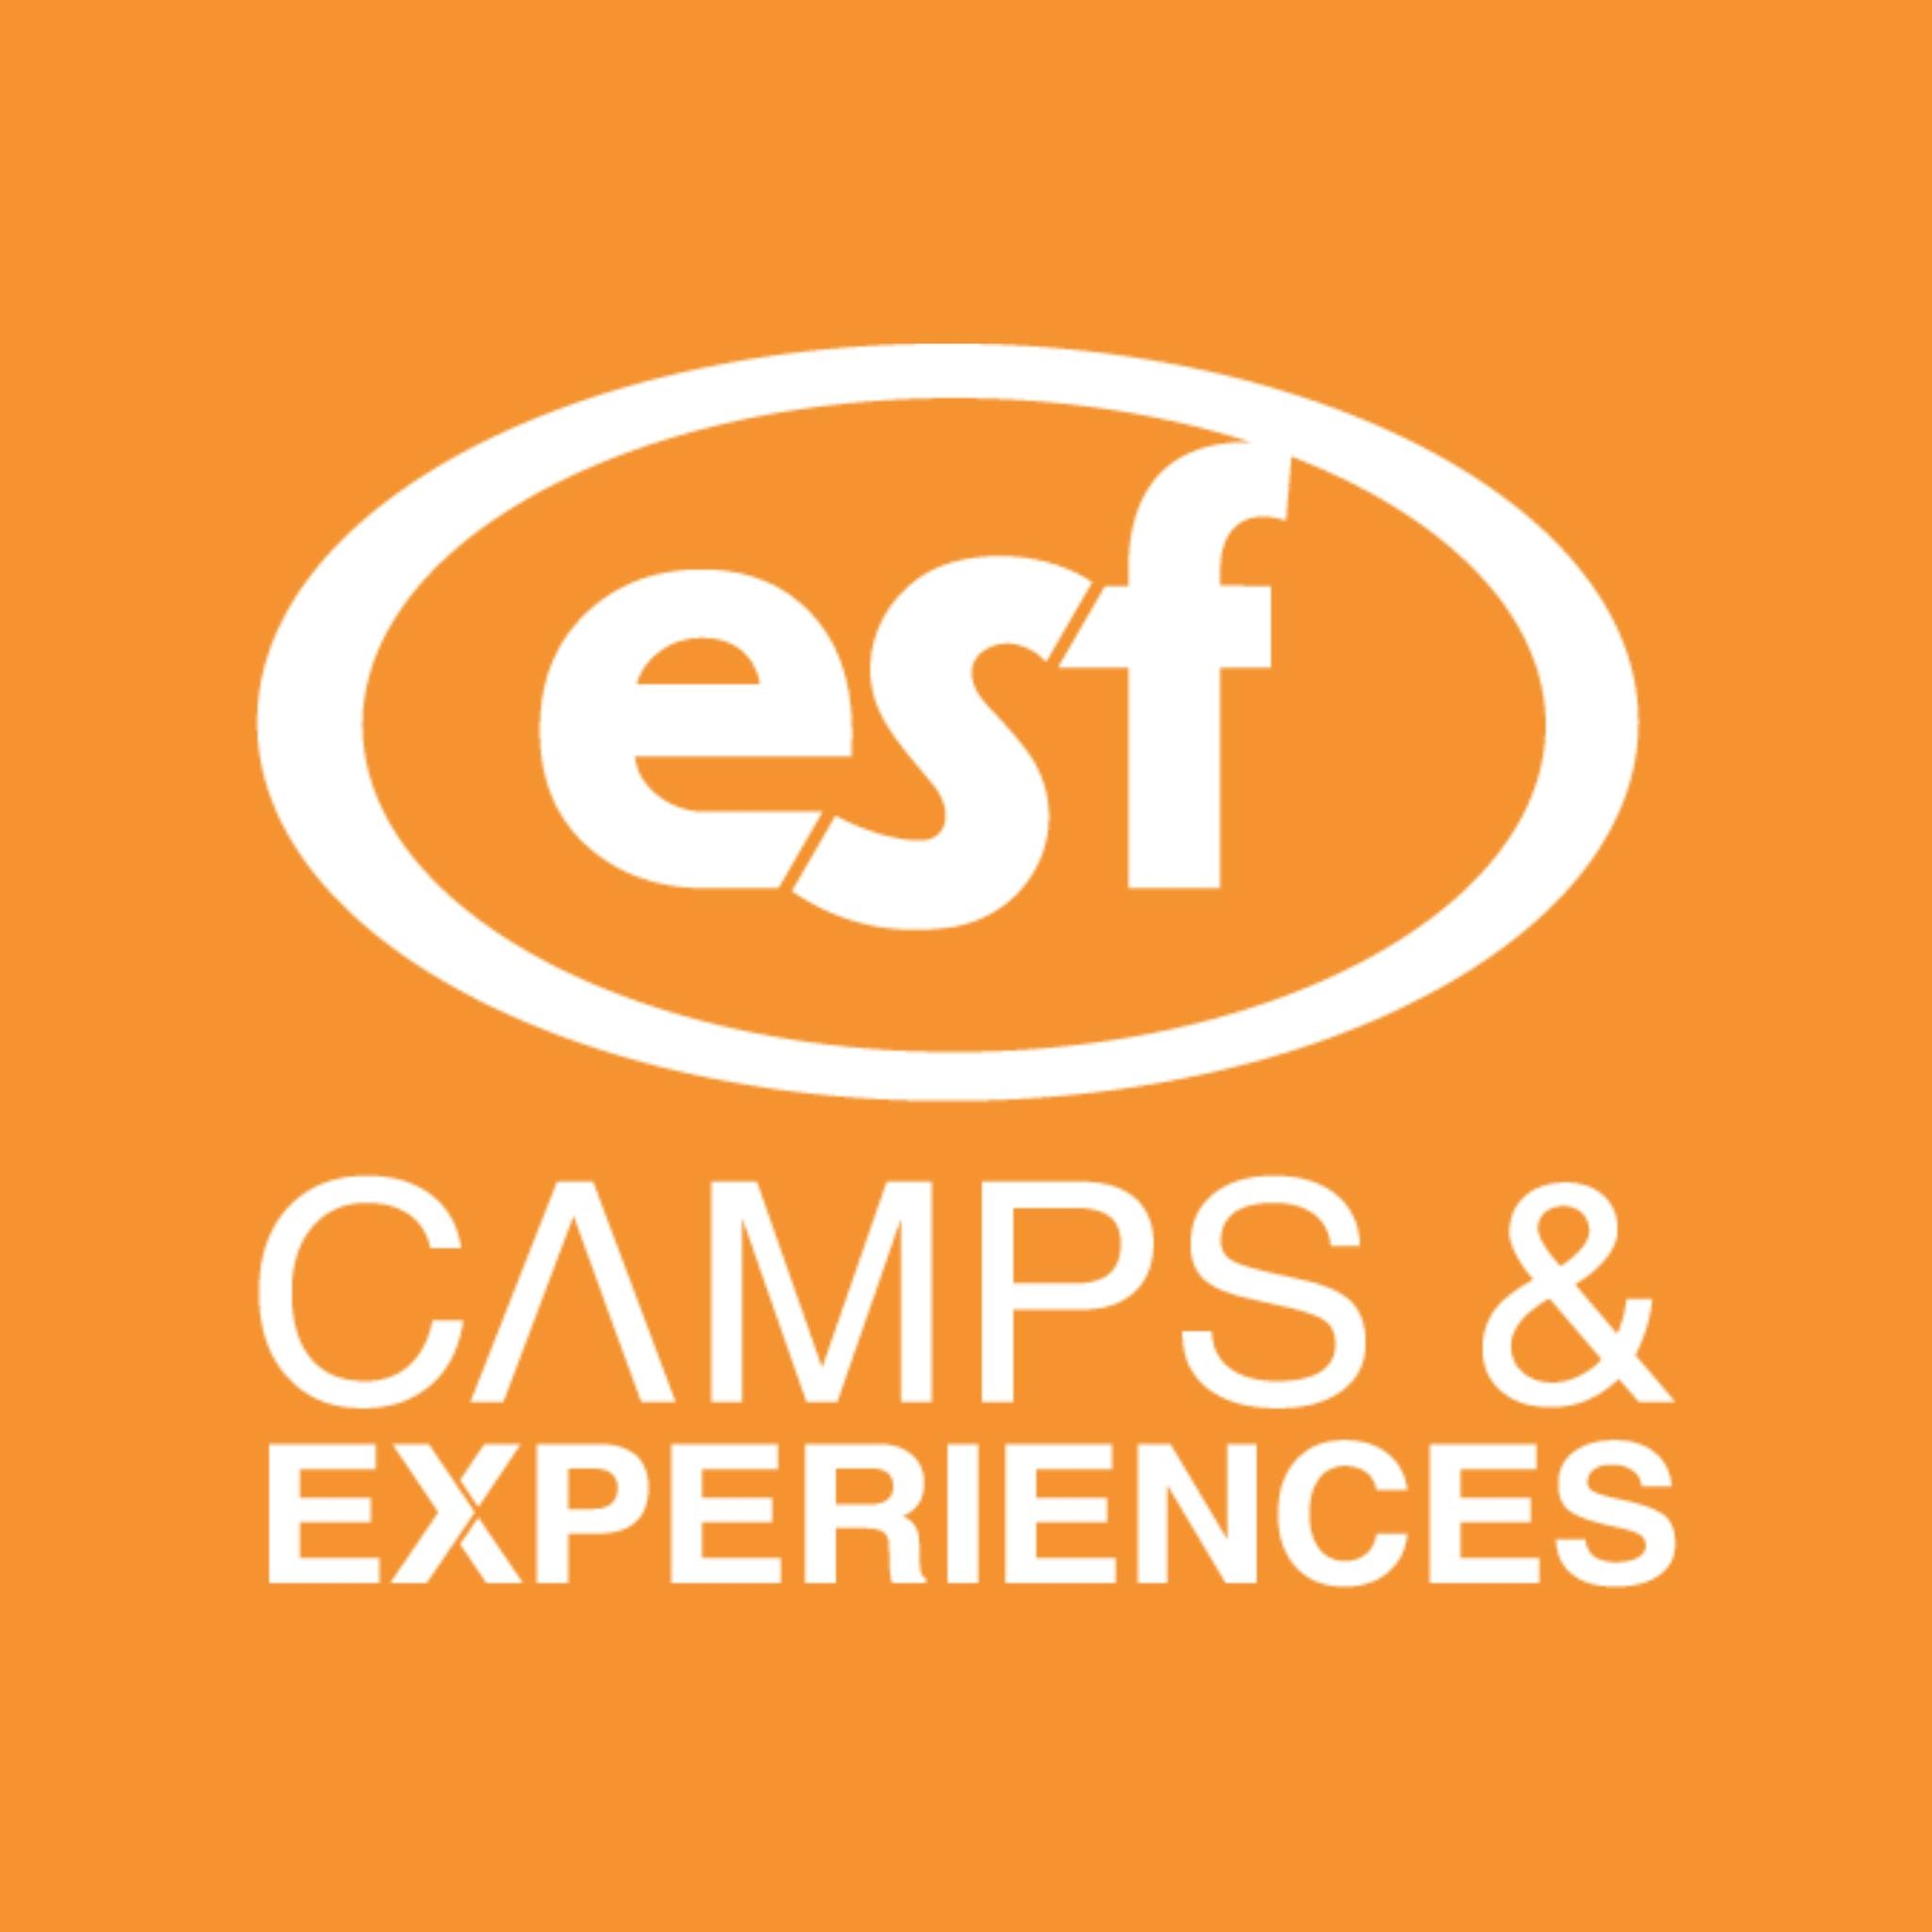 ESF Camps